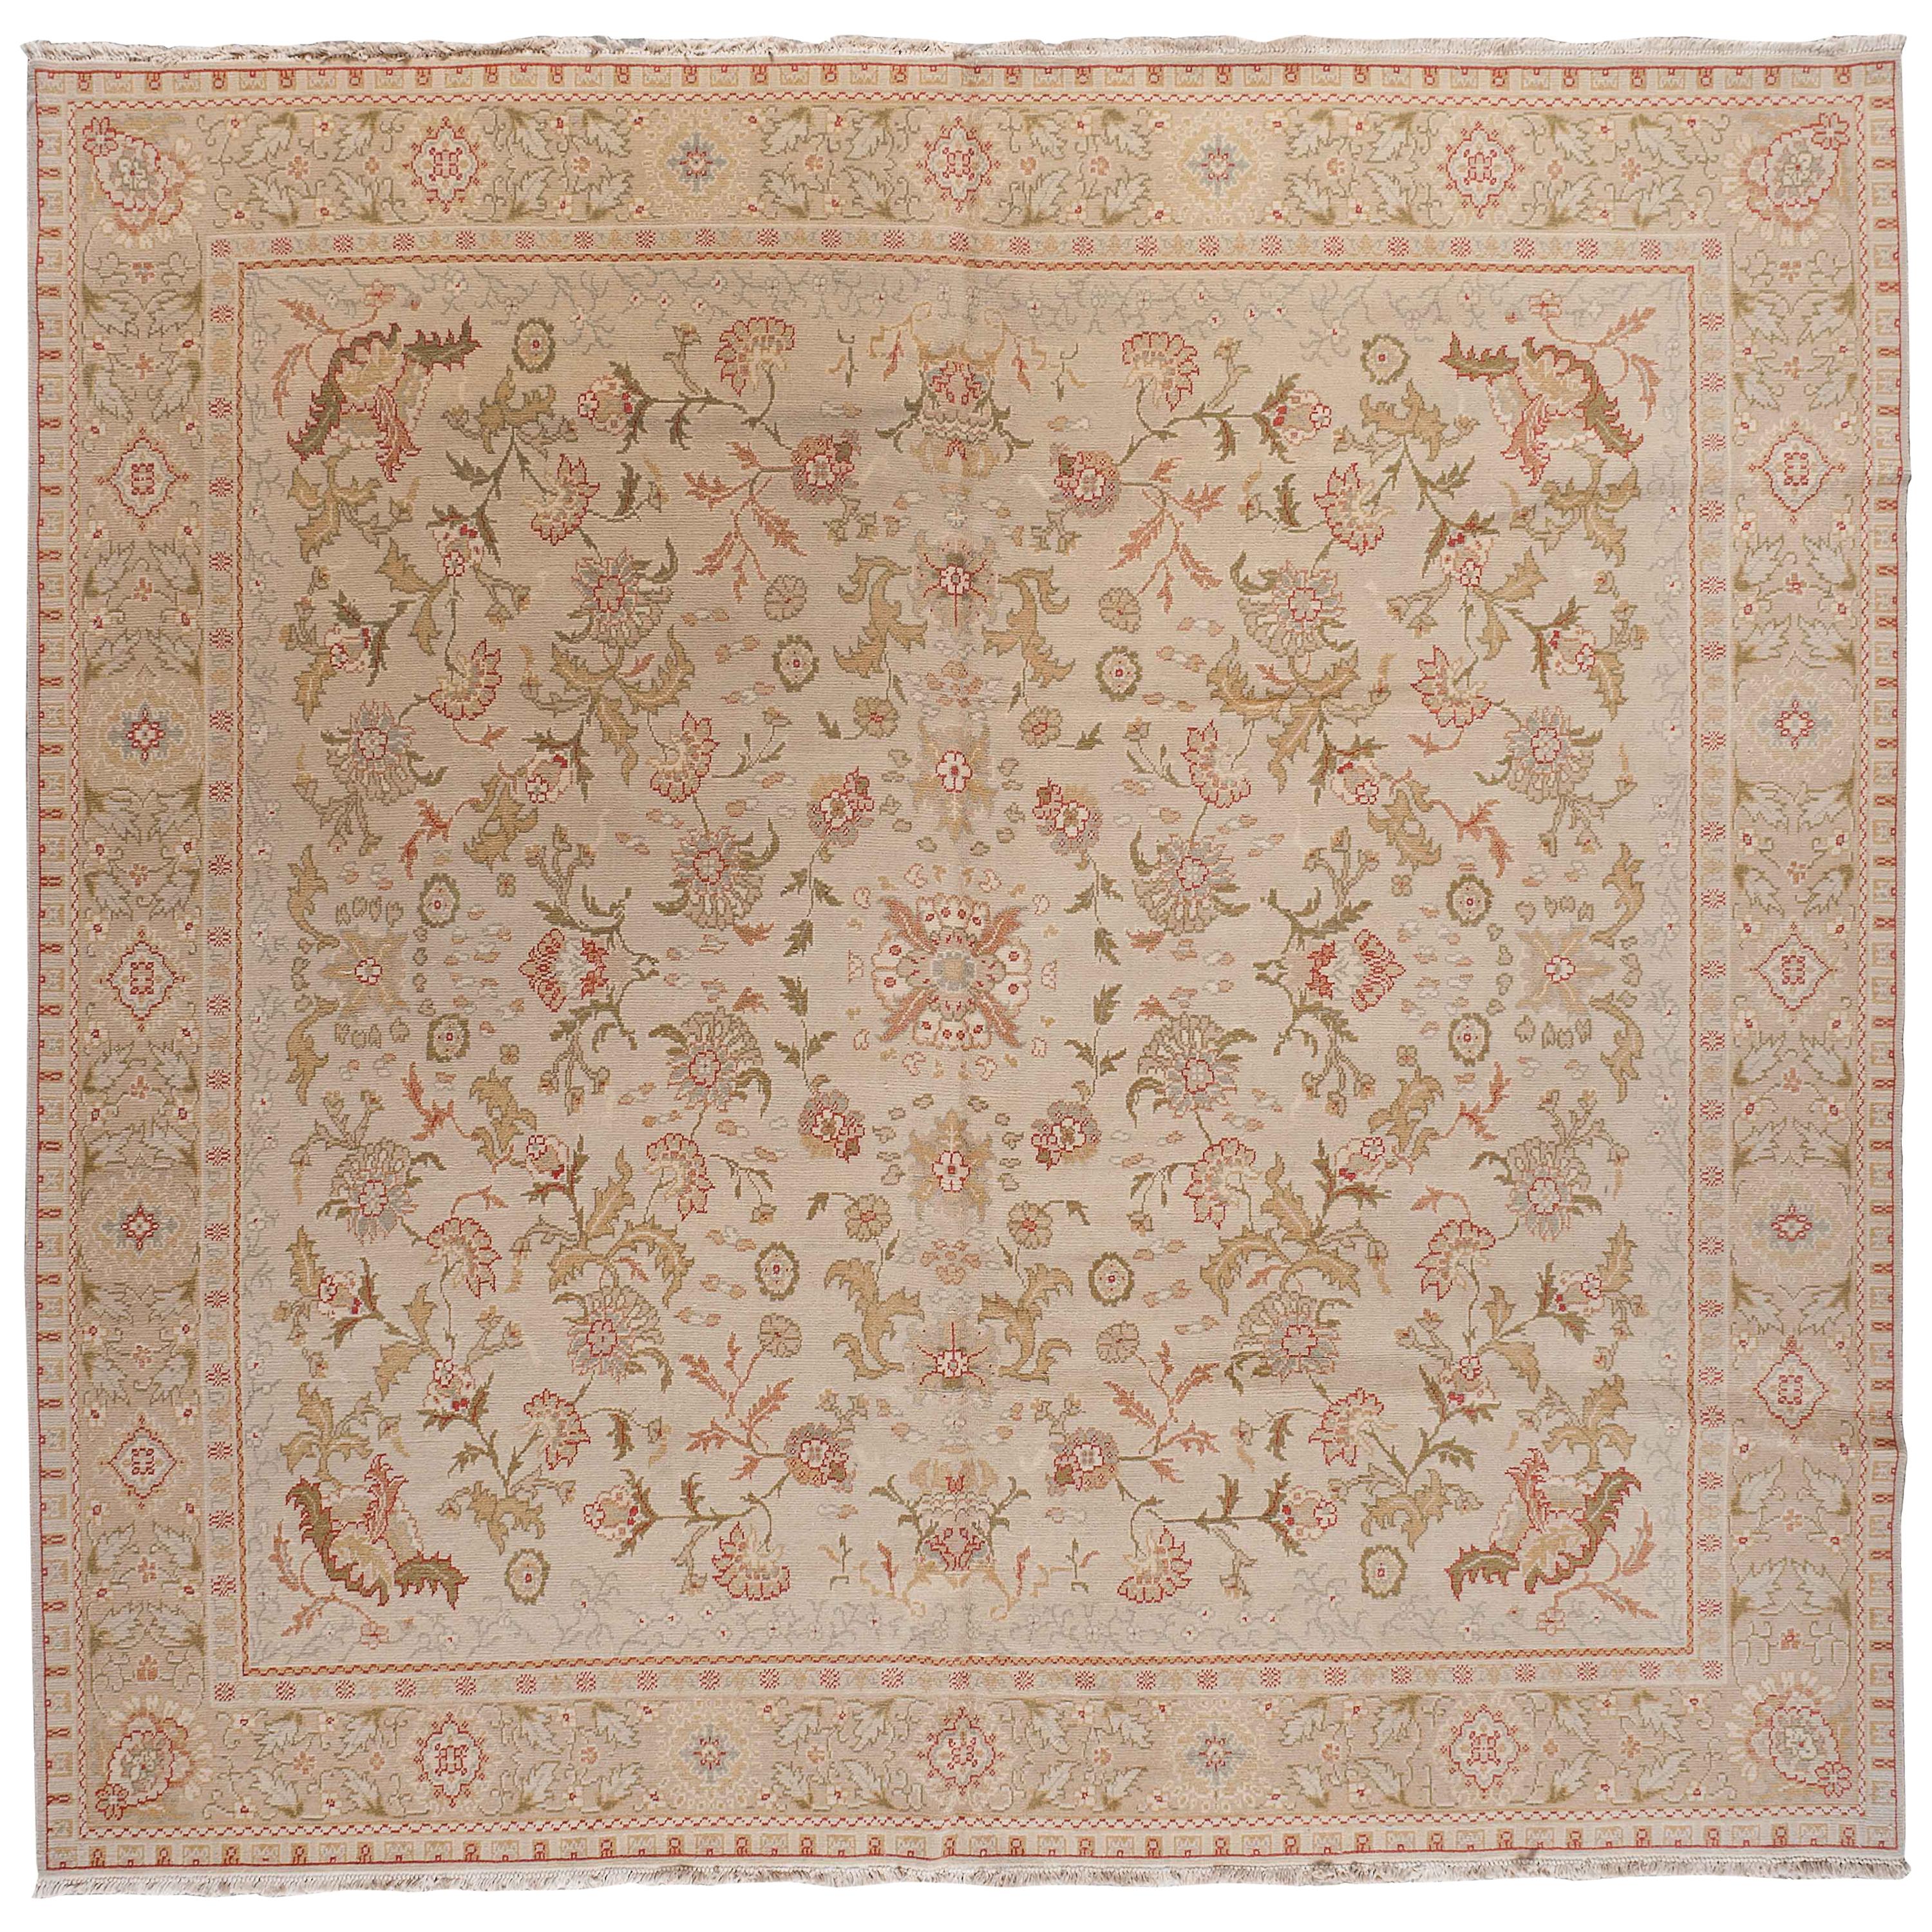 Square Floral Area Rug For Sale